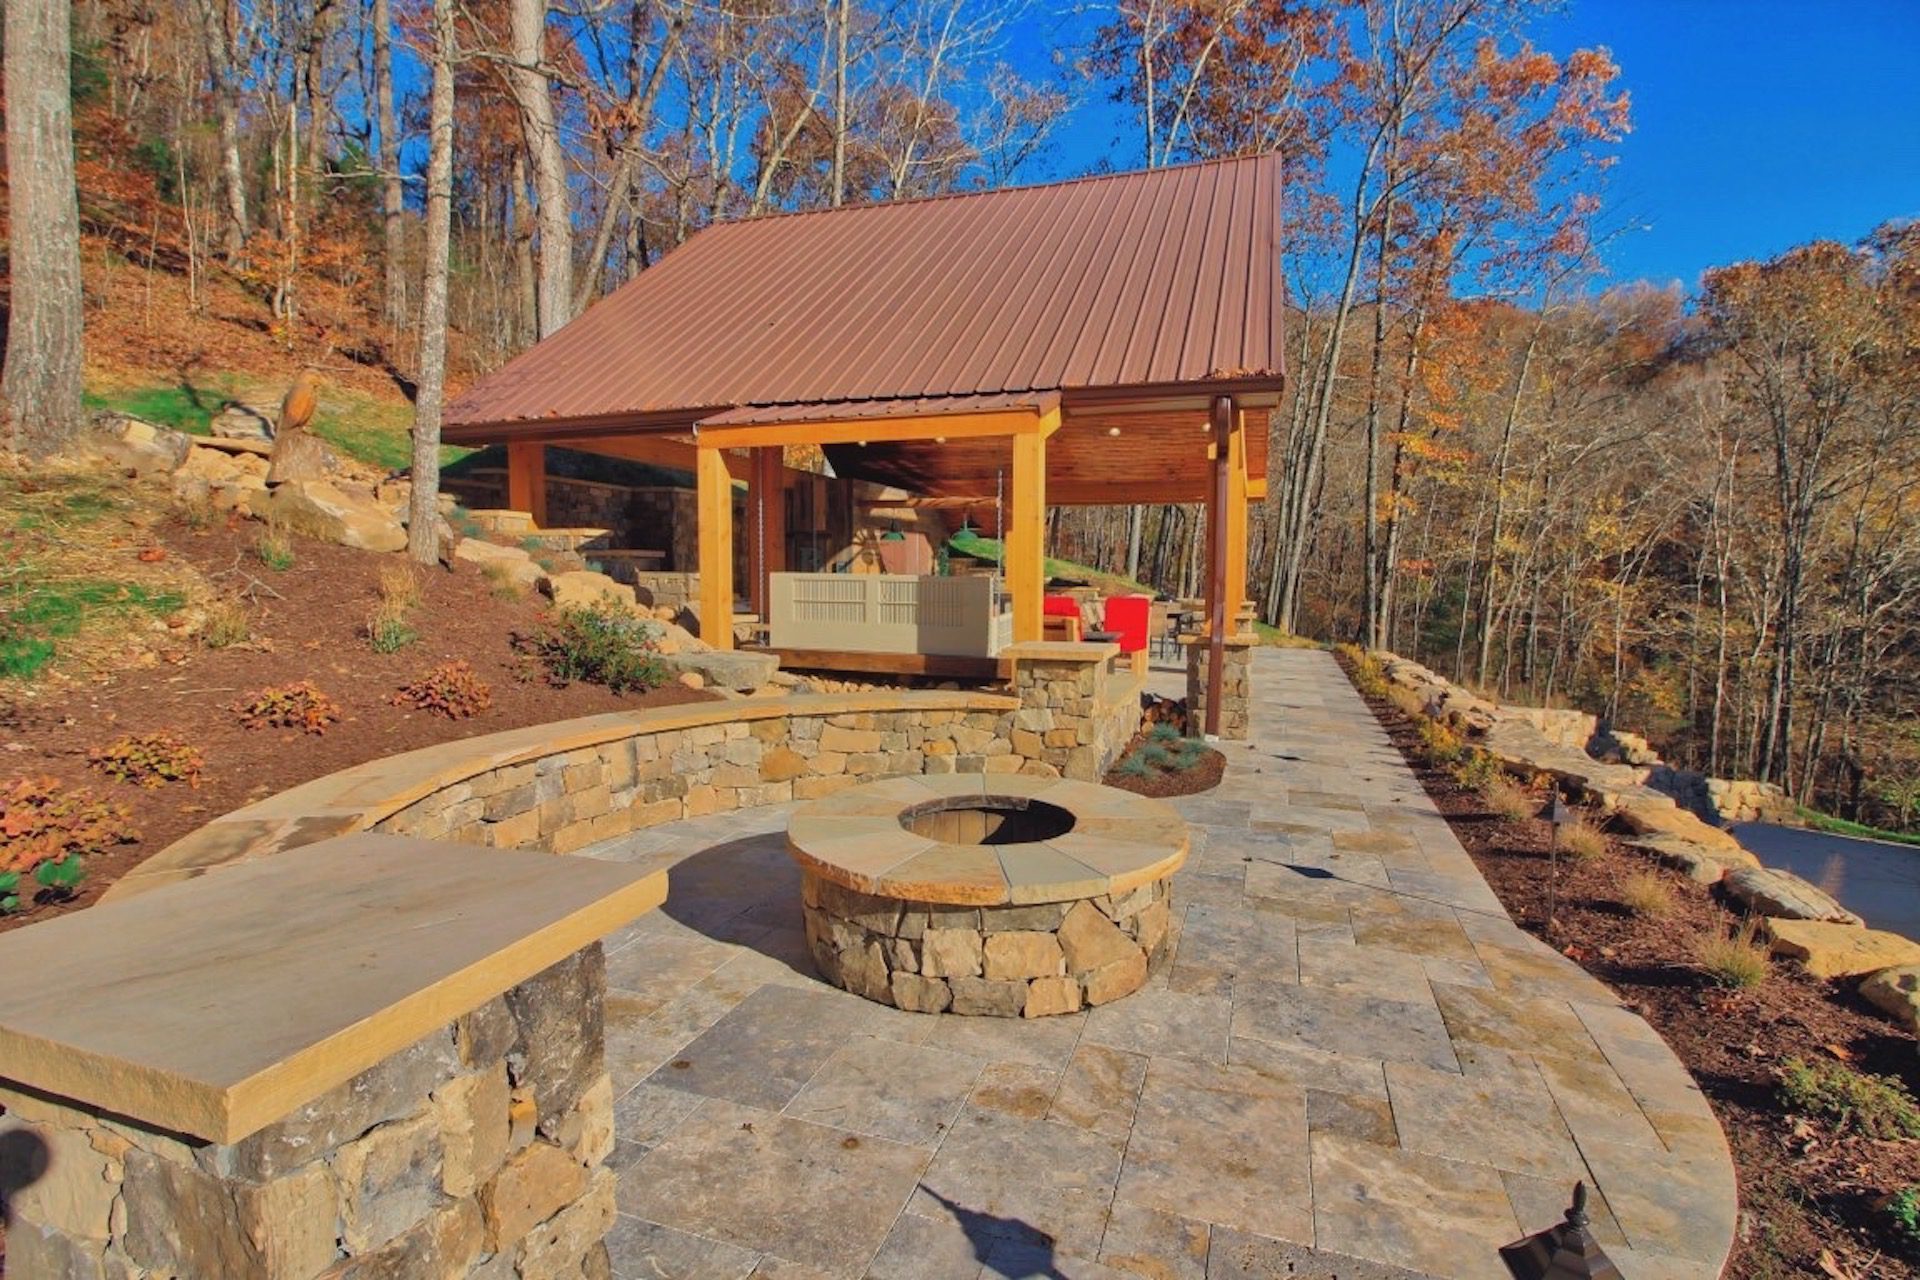 Fire pit and outdoor living space from general contractors in Nashville, TN